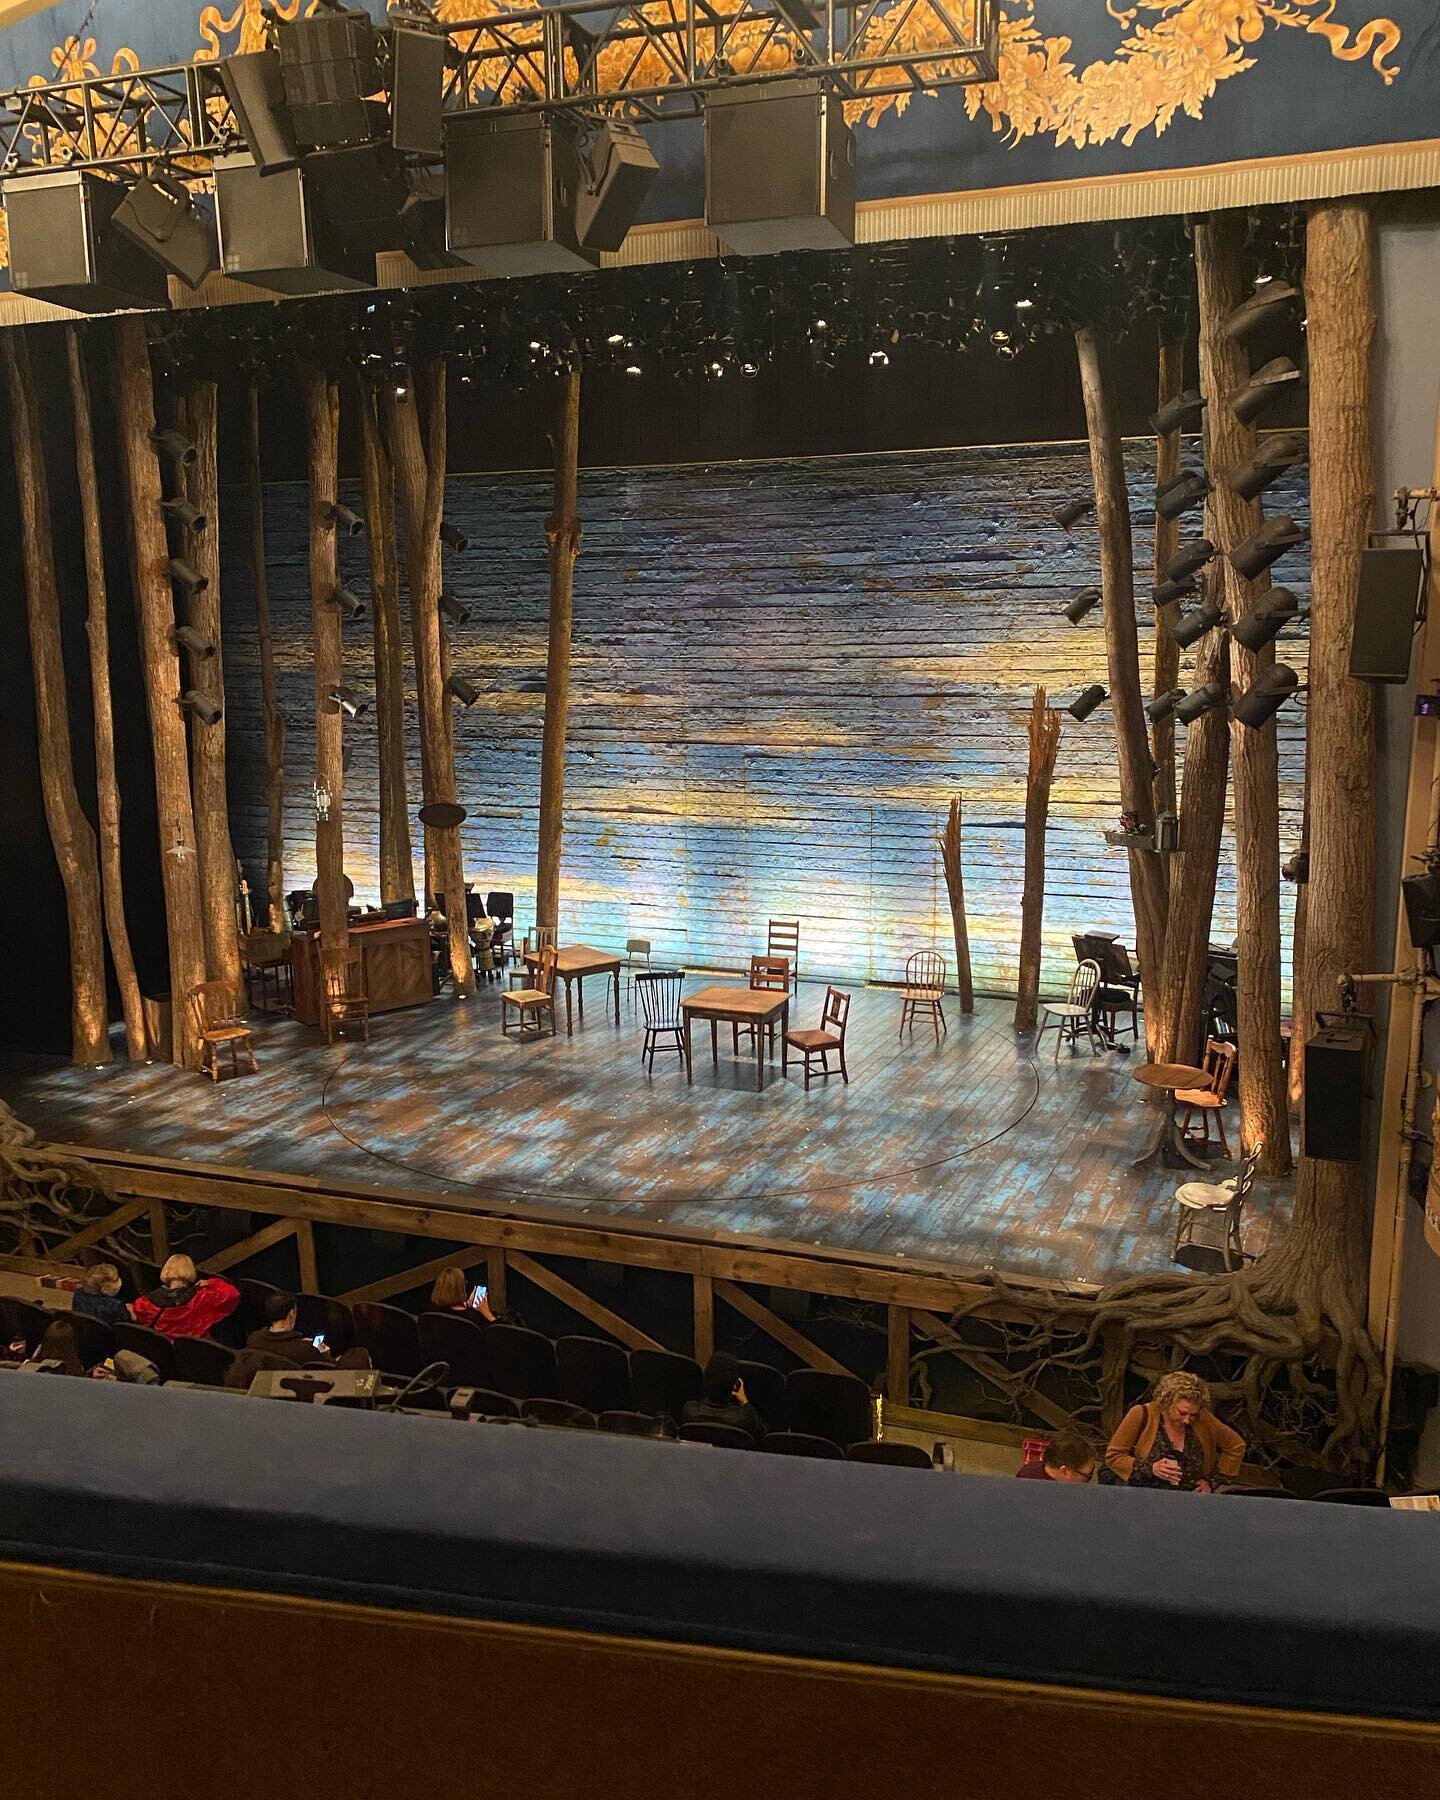 Glad I get to see this in person one last time. @wecomefromaway